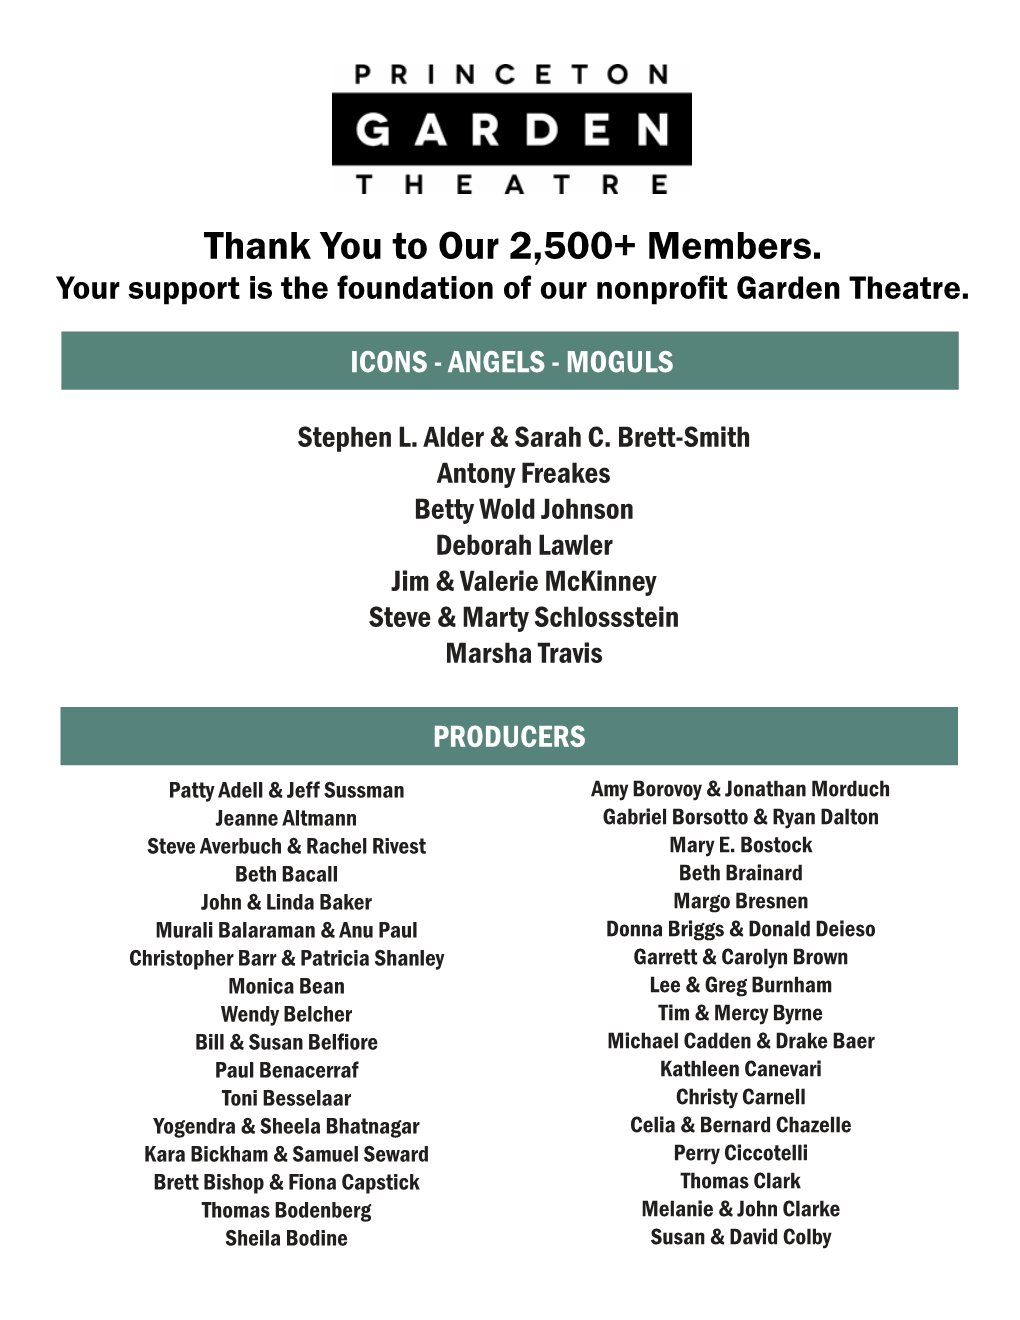 Thank You to Our 2,500+ Members. Your Support Is the Foundation of Our Nonprofit Garden Theatre